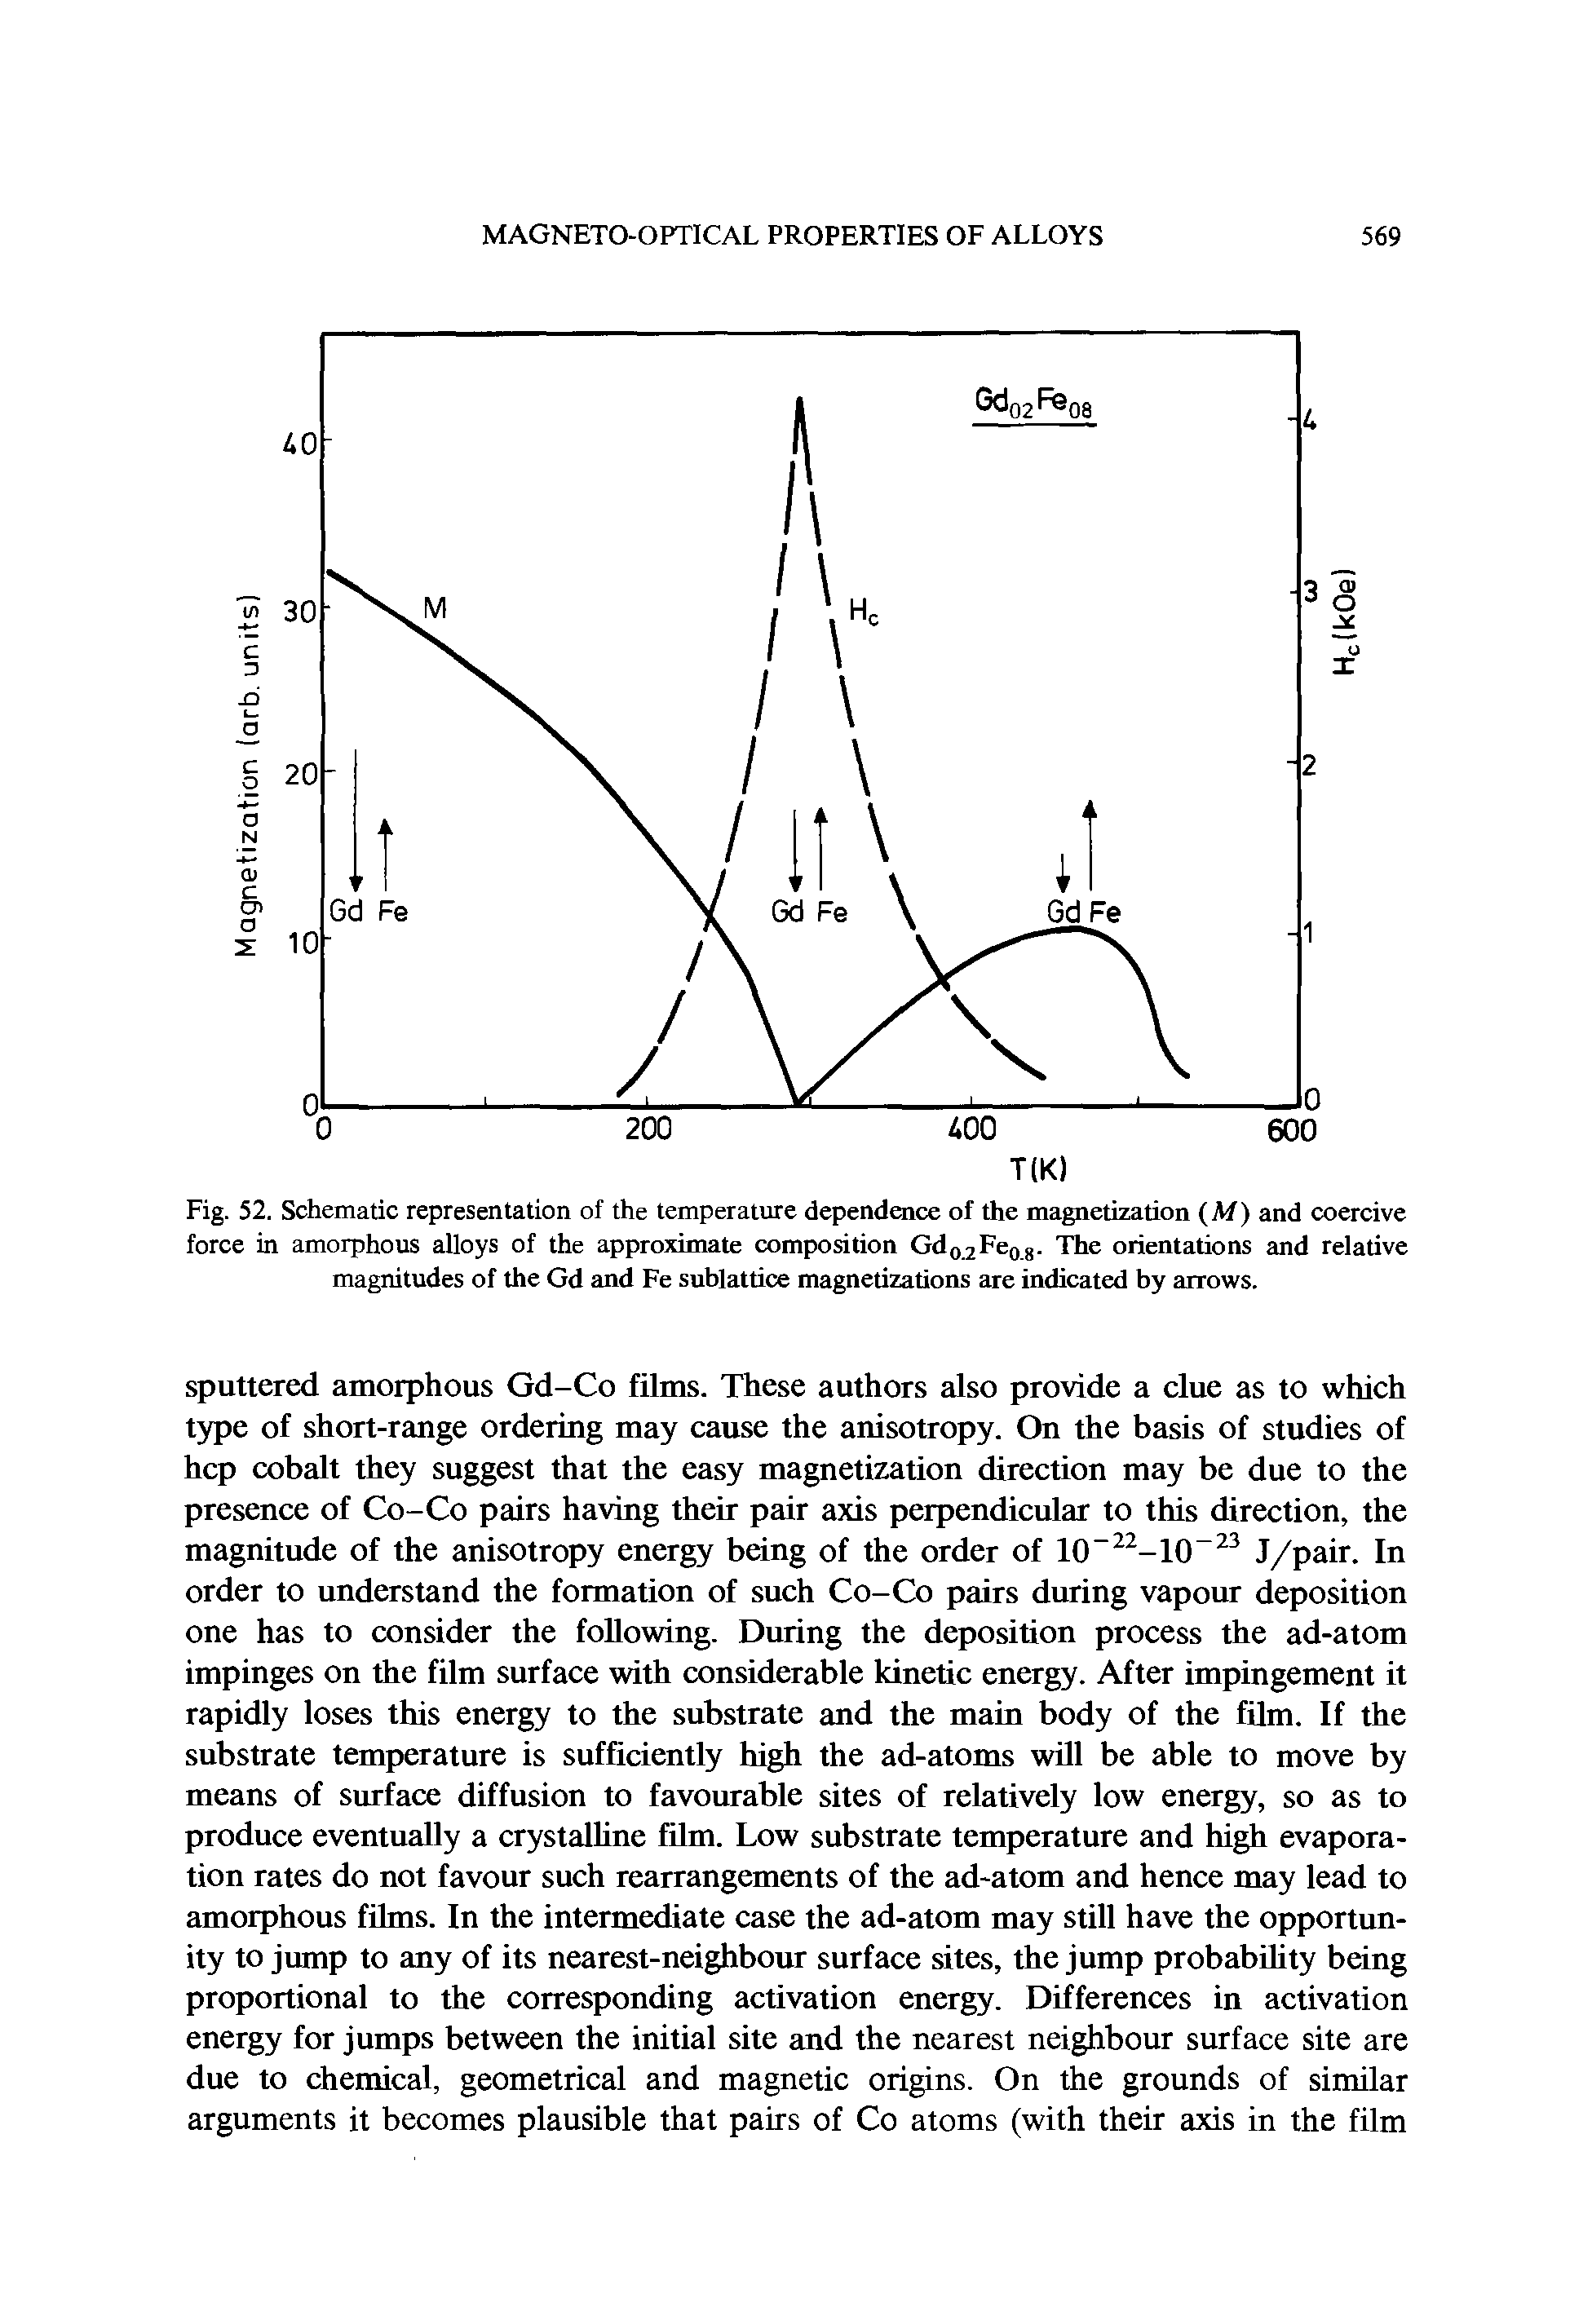 Fig. 52. Schematic representation of the temperature dependence of the magnetization (M) and coercive force in amorphous alloys of the approximate composition Gd02Fe08. The orientations and relative magnitudes of the Gd and Fe sublattice magnetizations are indicated by arrows.